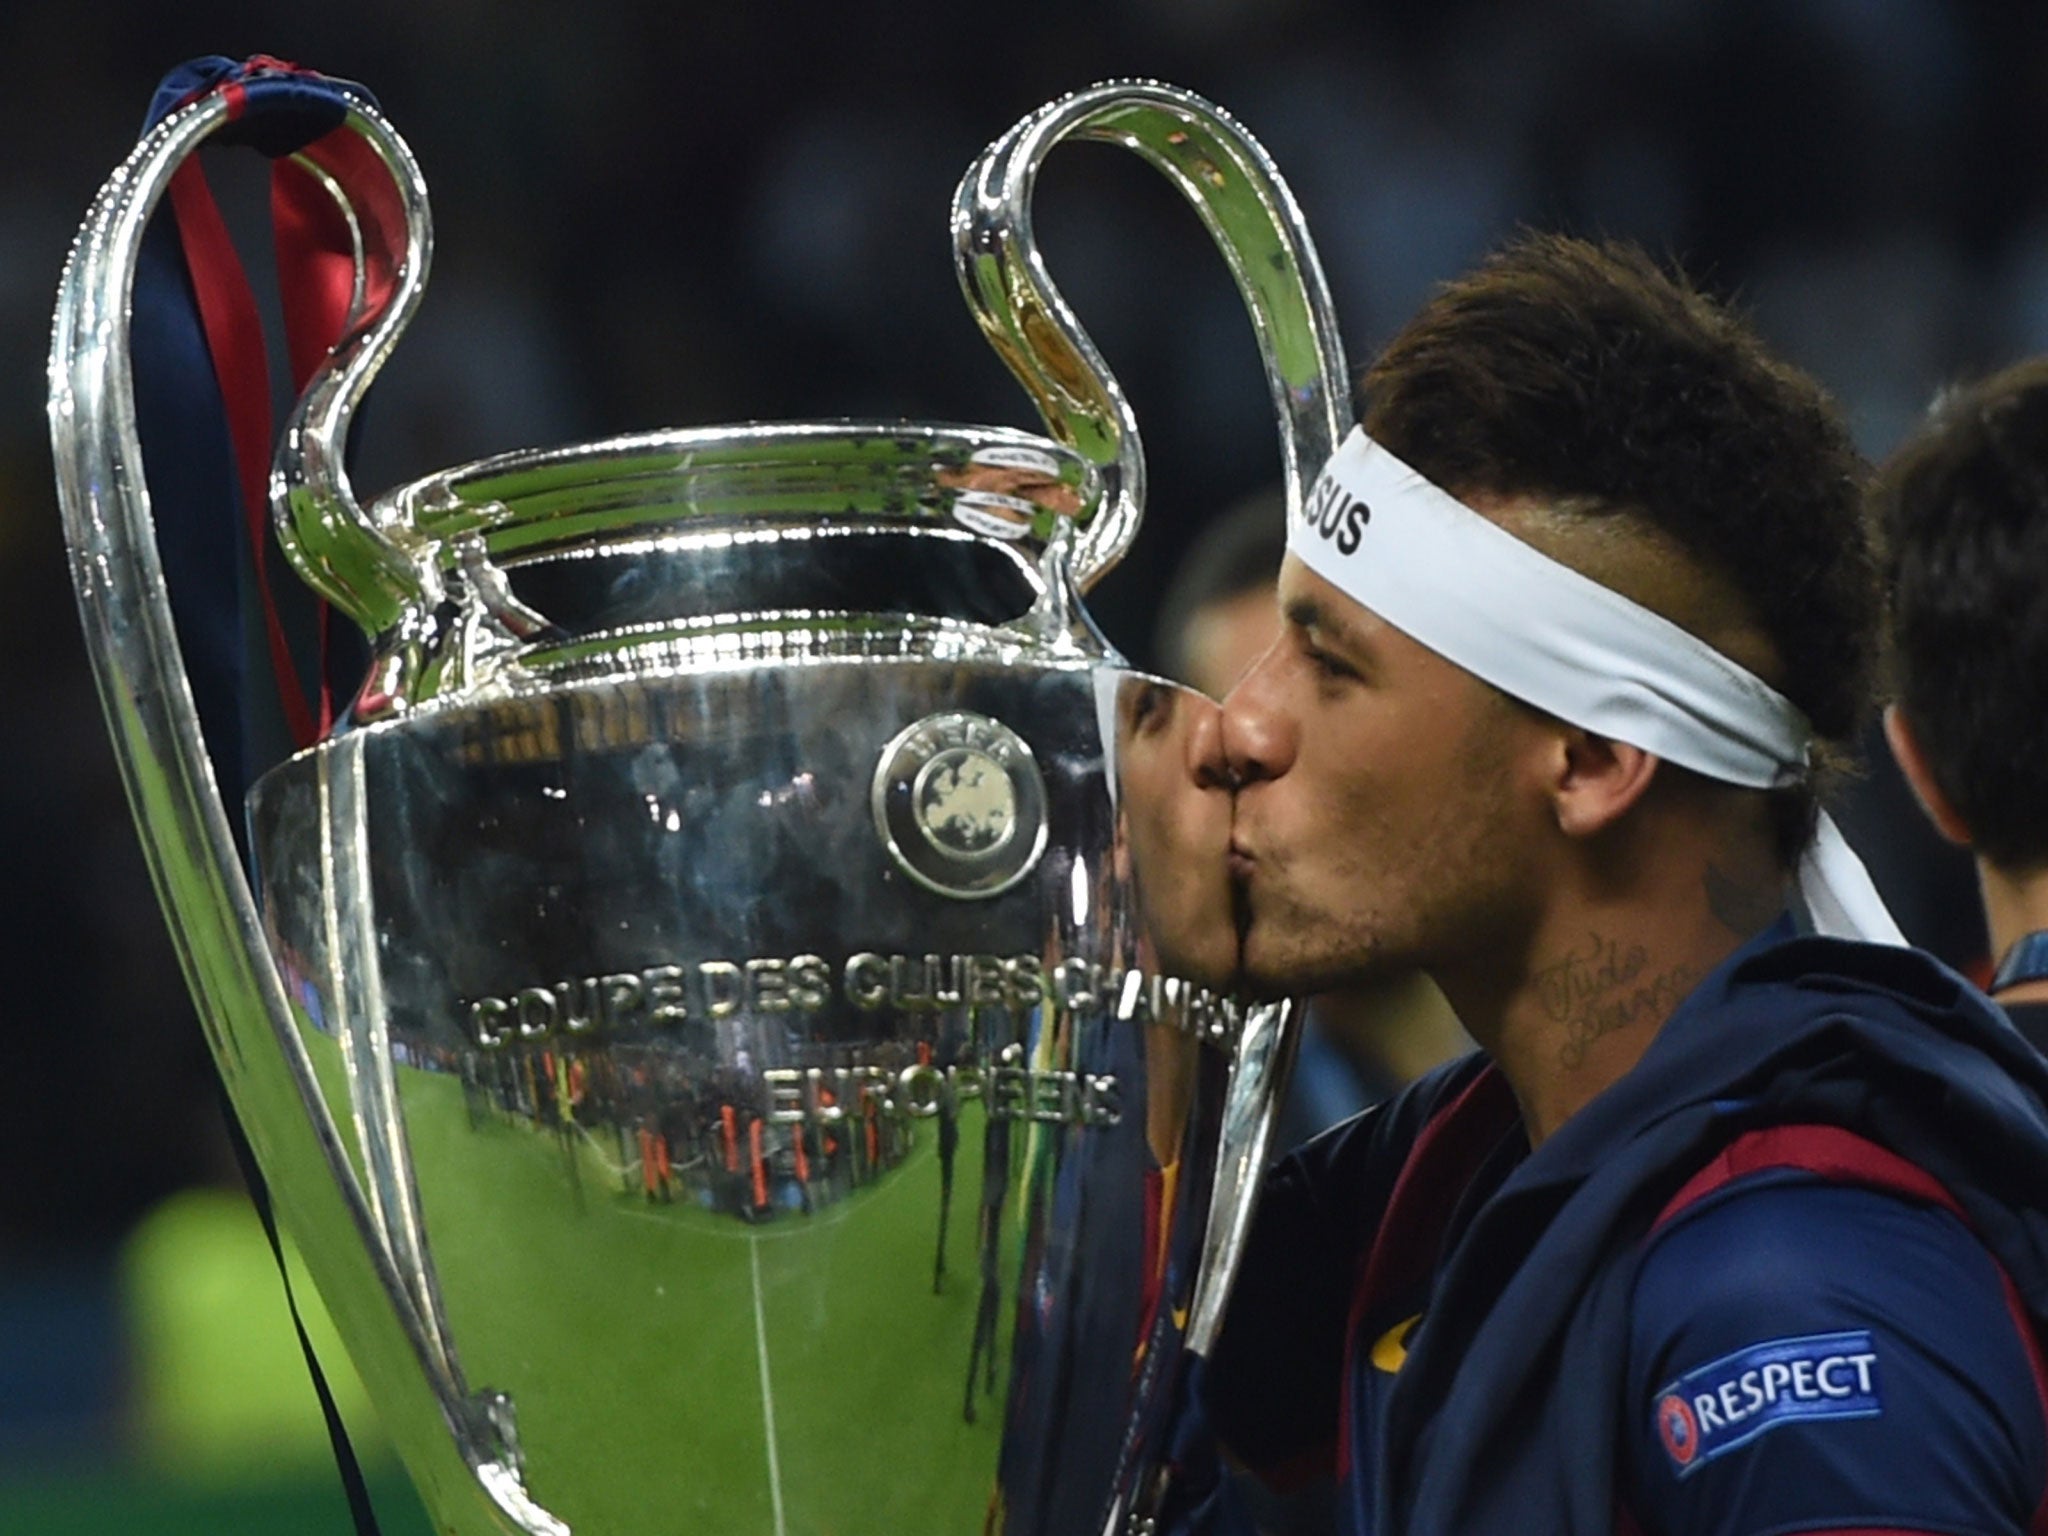 Barcelona forward Neymar has been linked with Manchester United